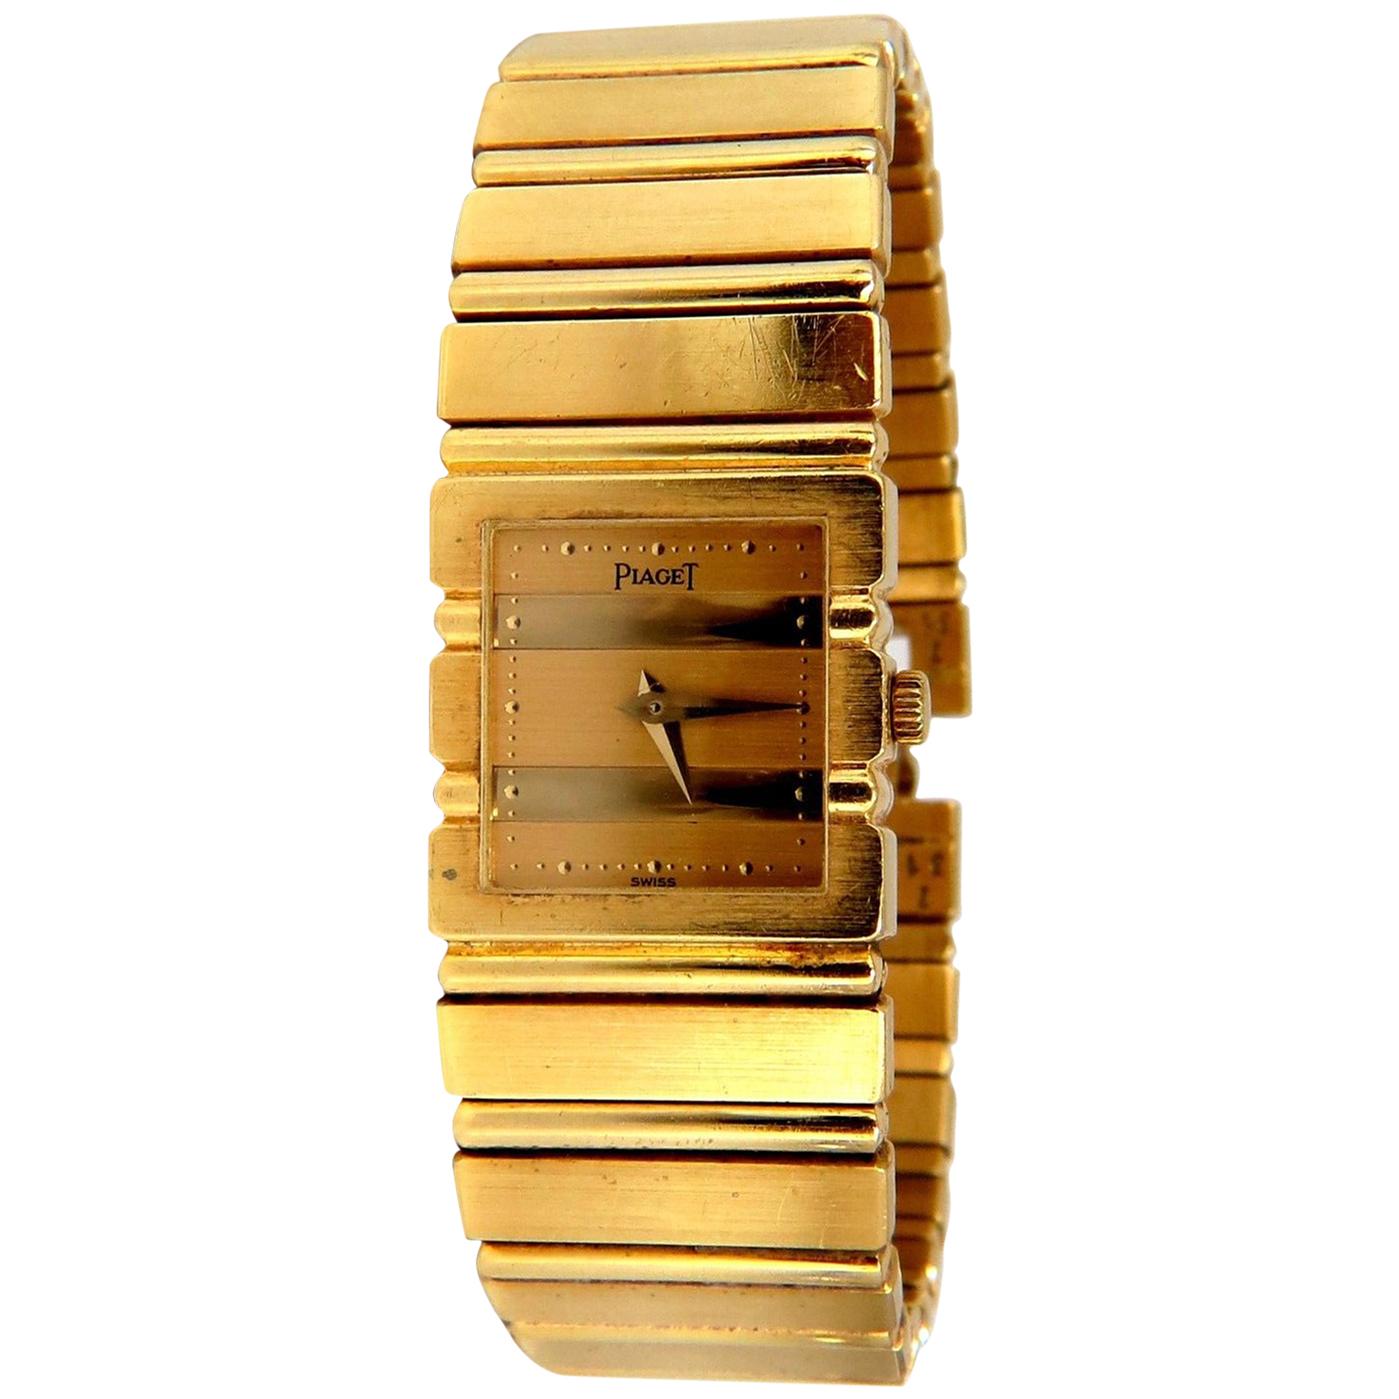 Piaget Polo 18K Gold Quartz Mens Watch 8131 C701 Swiss Authentic & Working Order